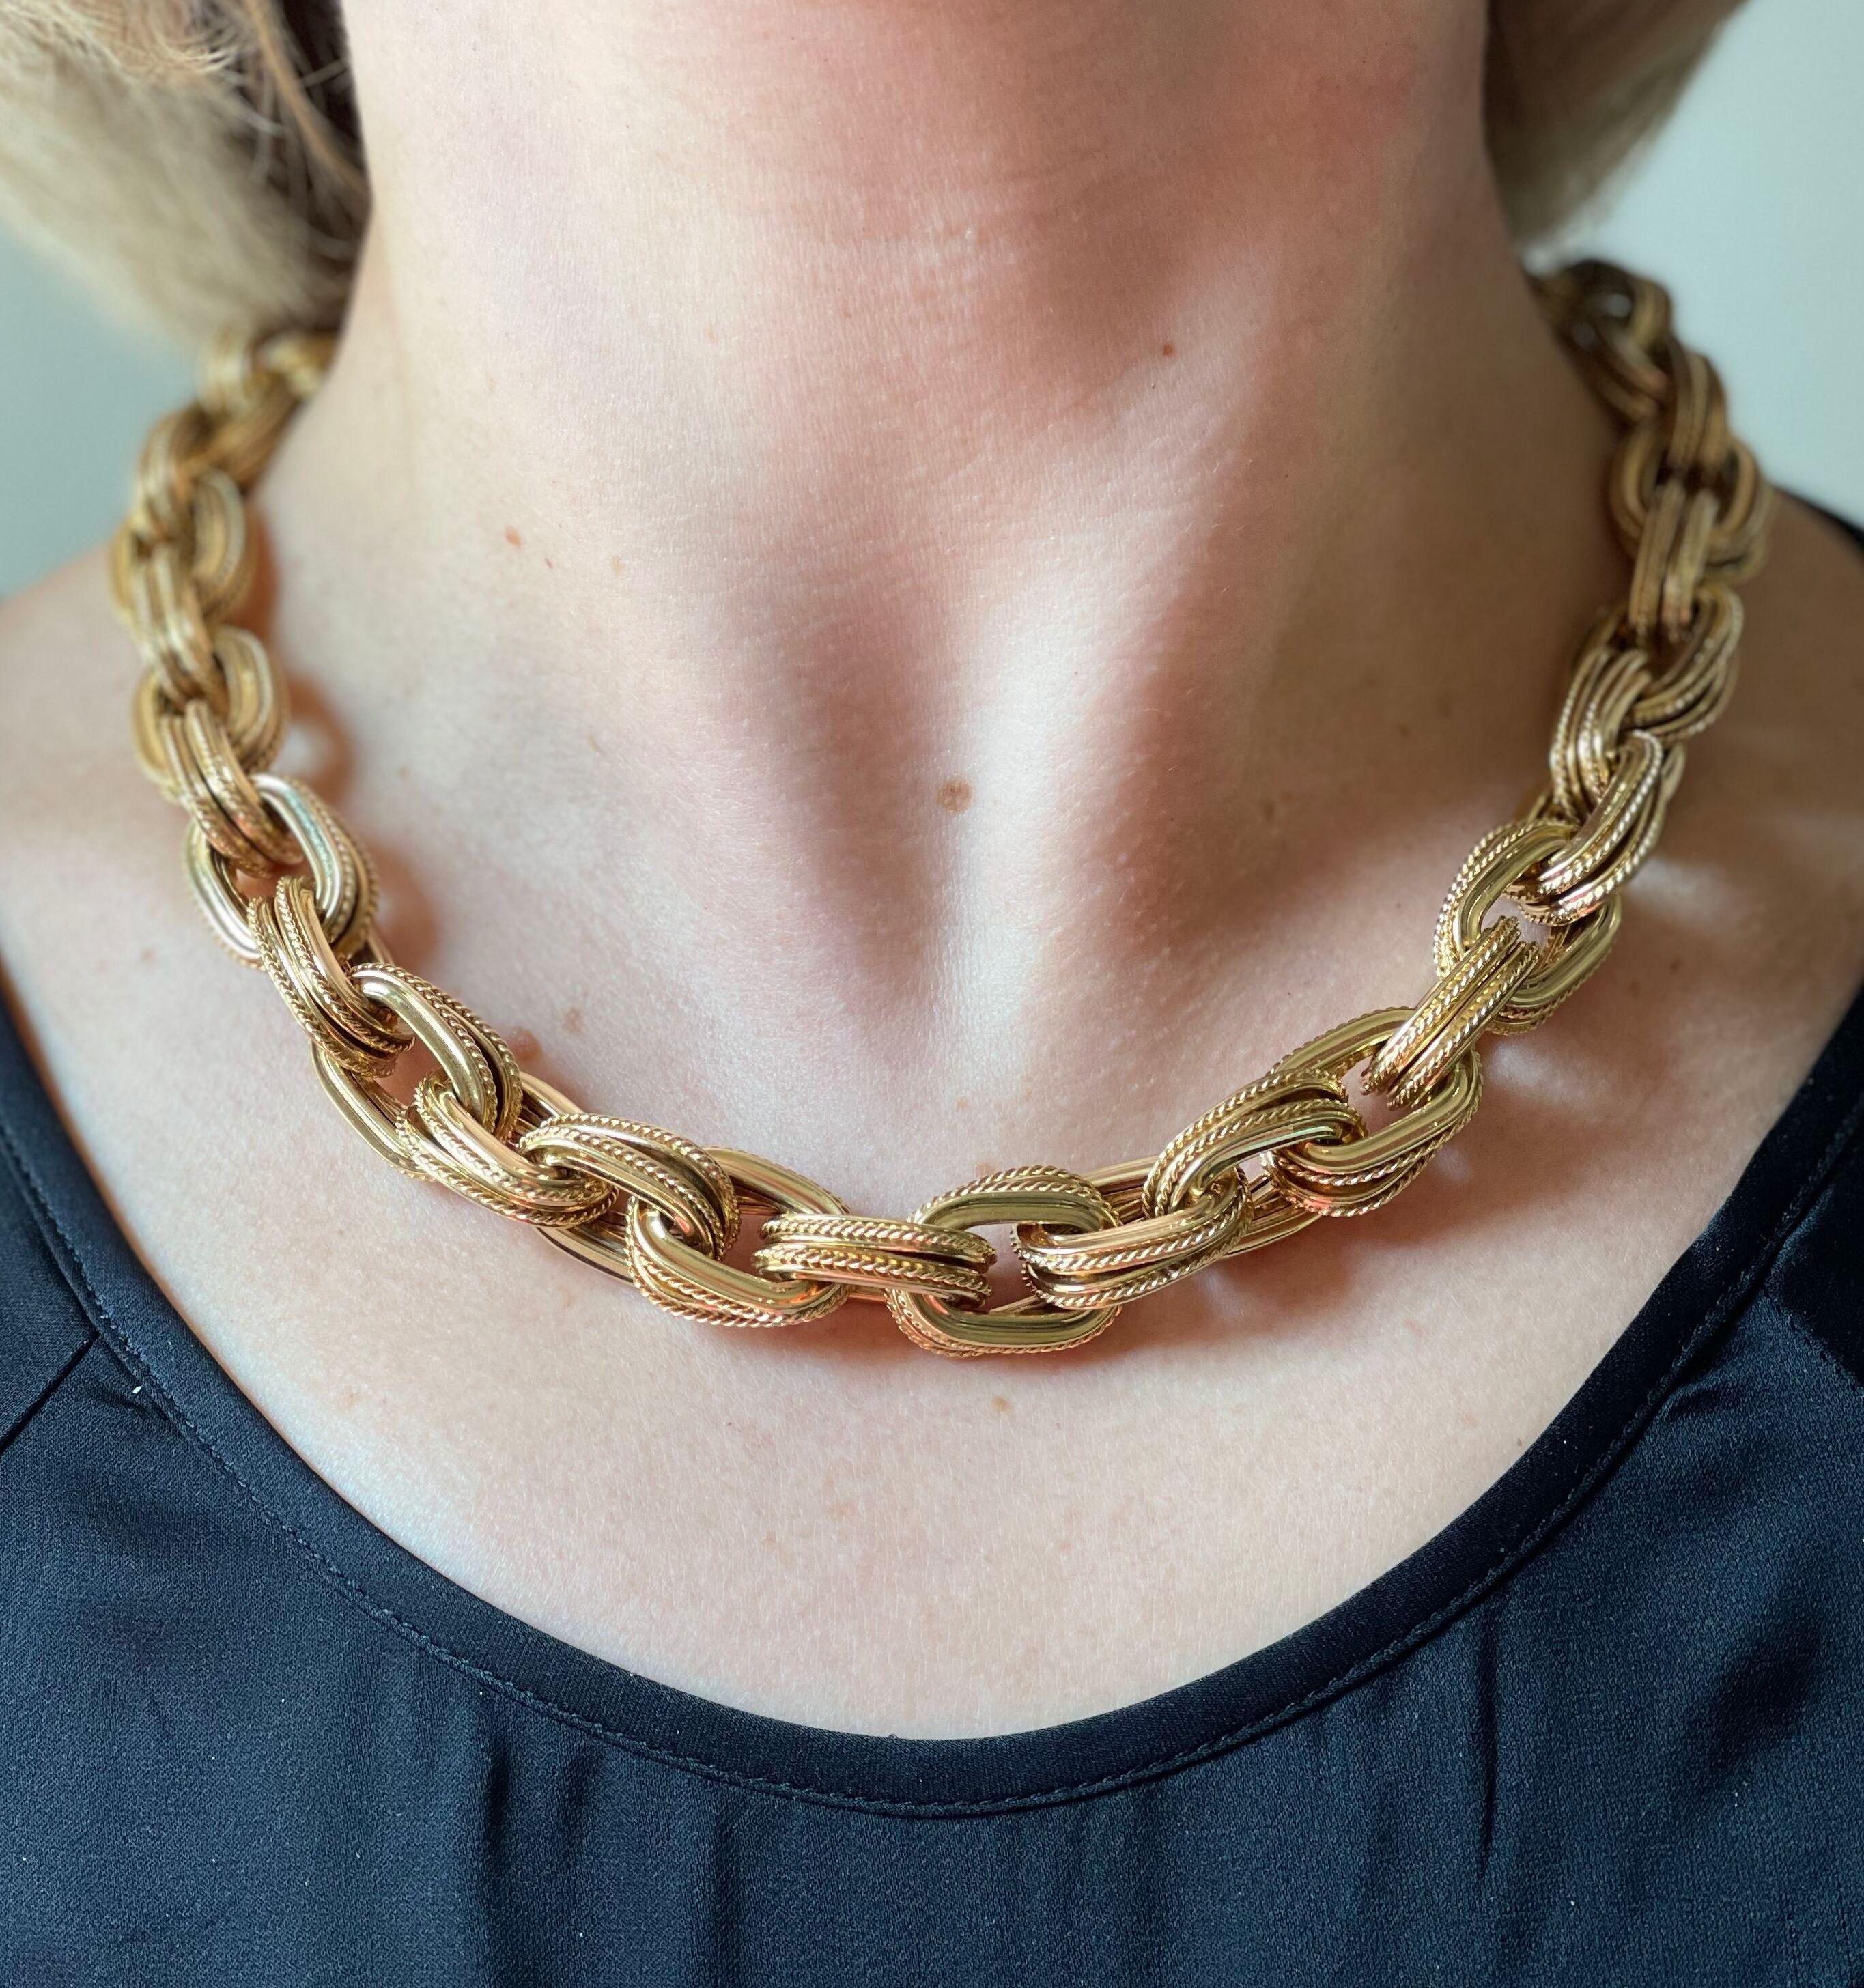 1980s 18k gold Italian made chain necklace, featuring large links. Each section consists of two links. Necklace is 20